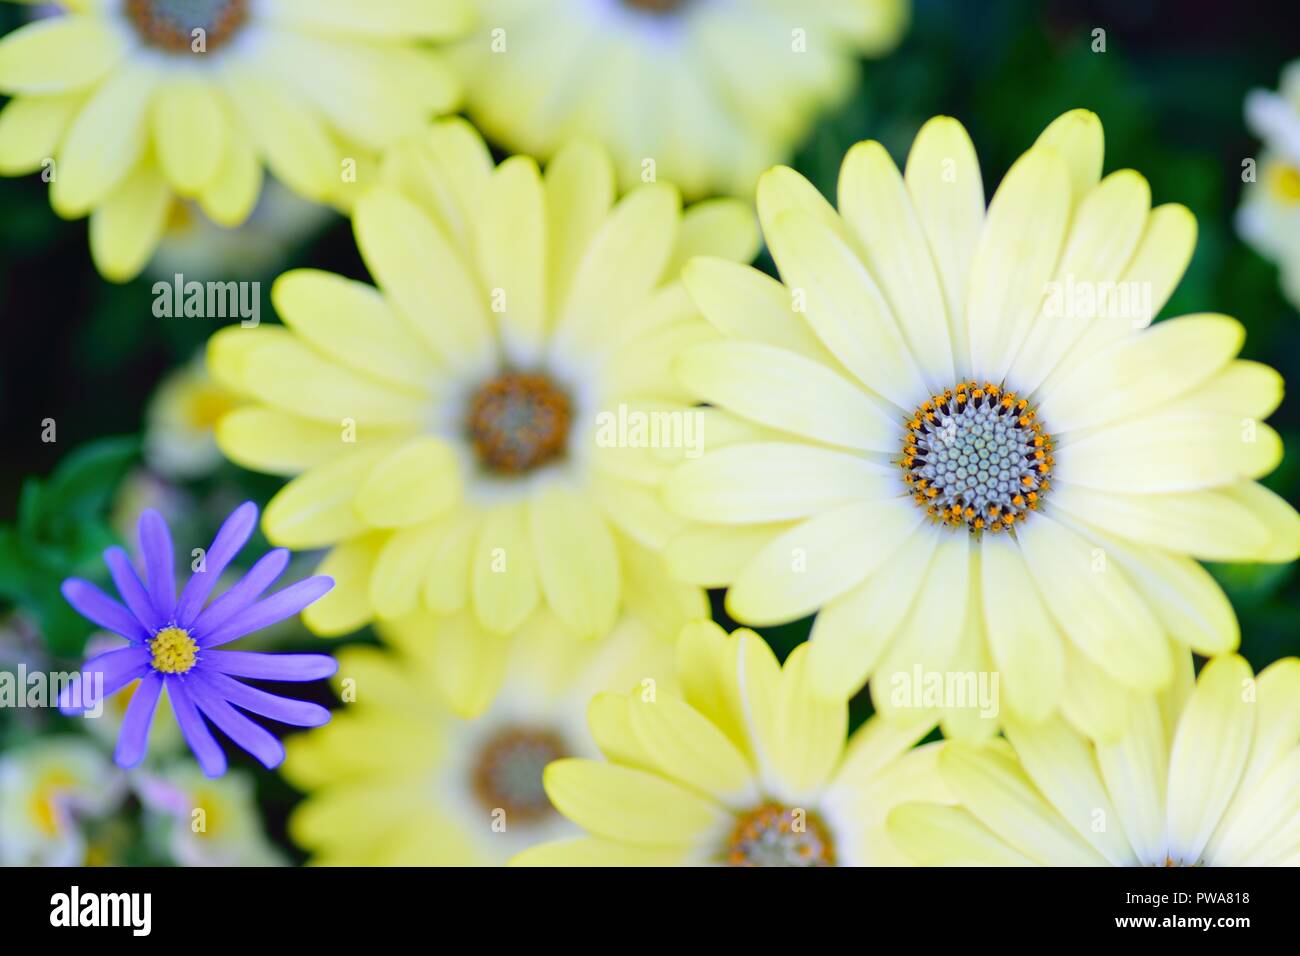 Macro details of yellow Daisy flowers in spring garden Stock Photo